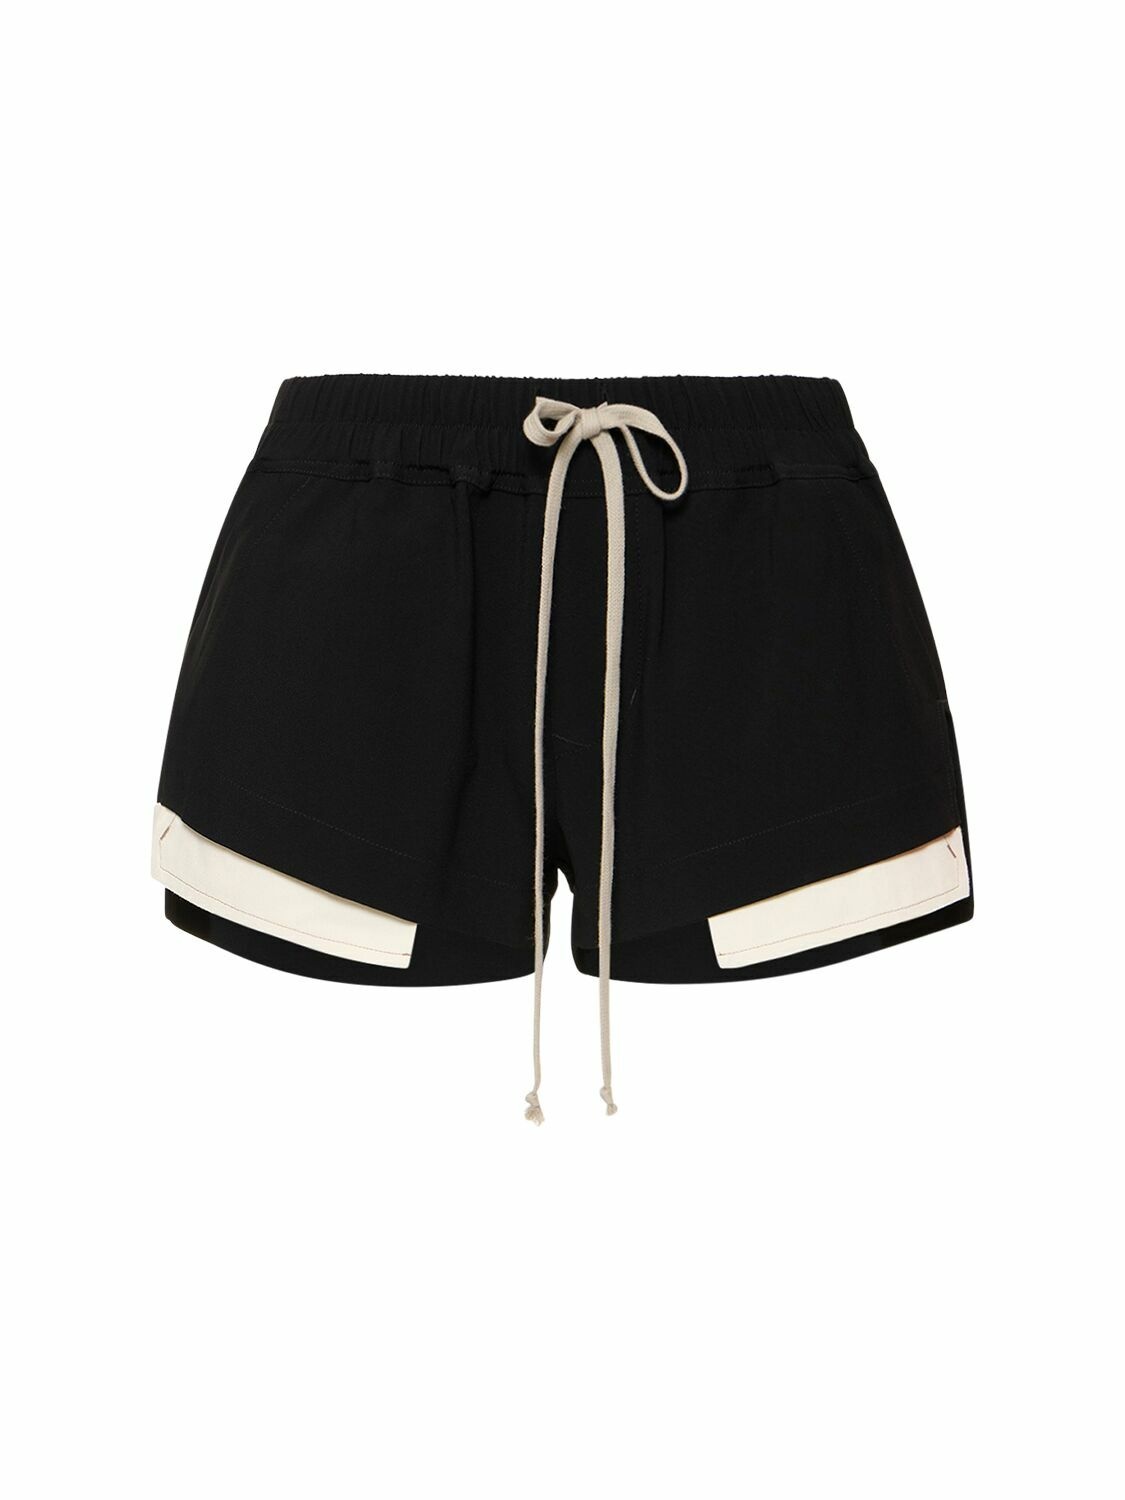 Leather shorts in black - Rick Owens